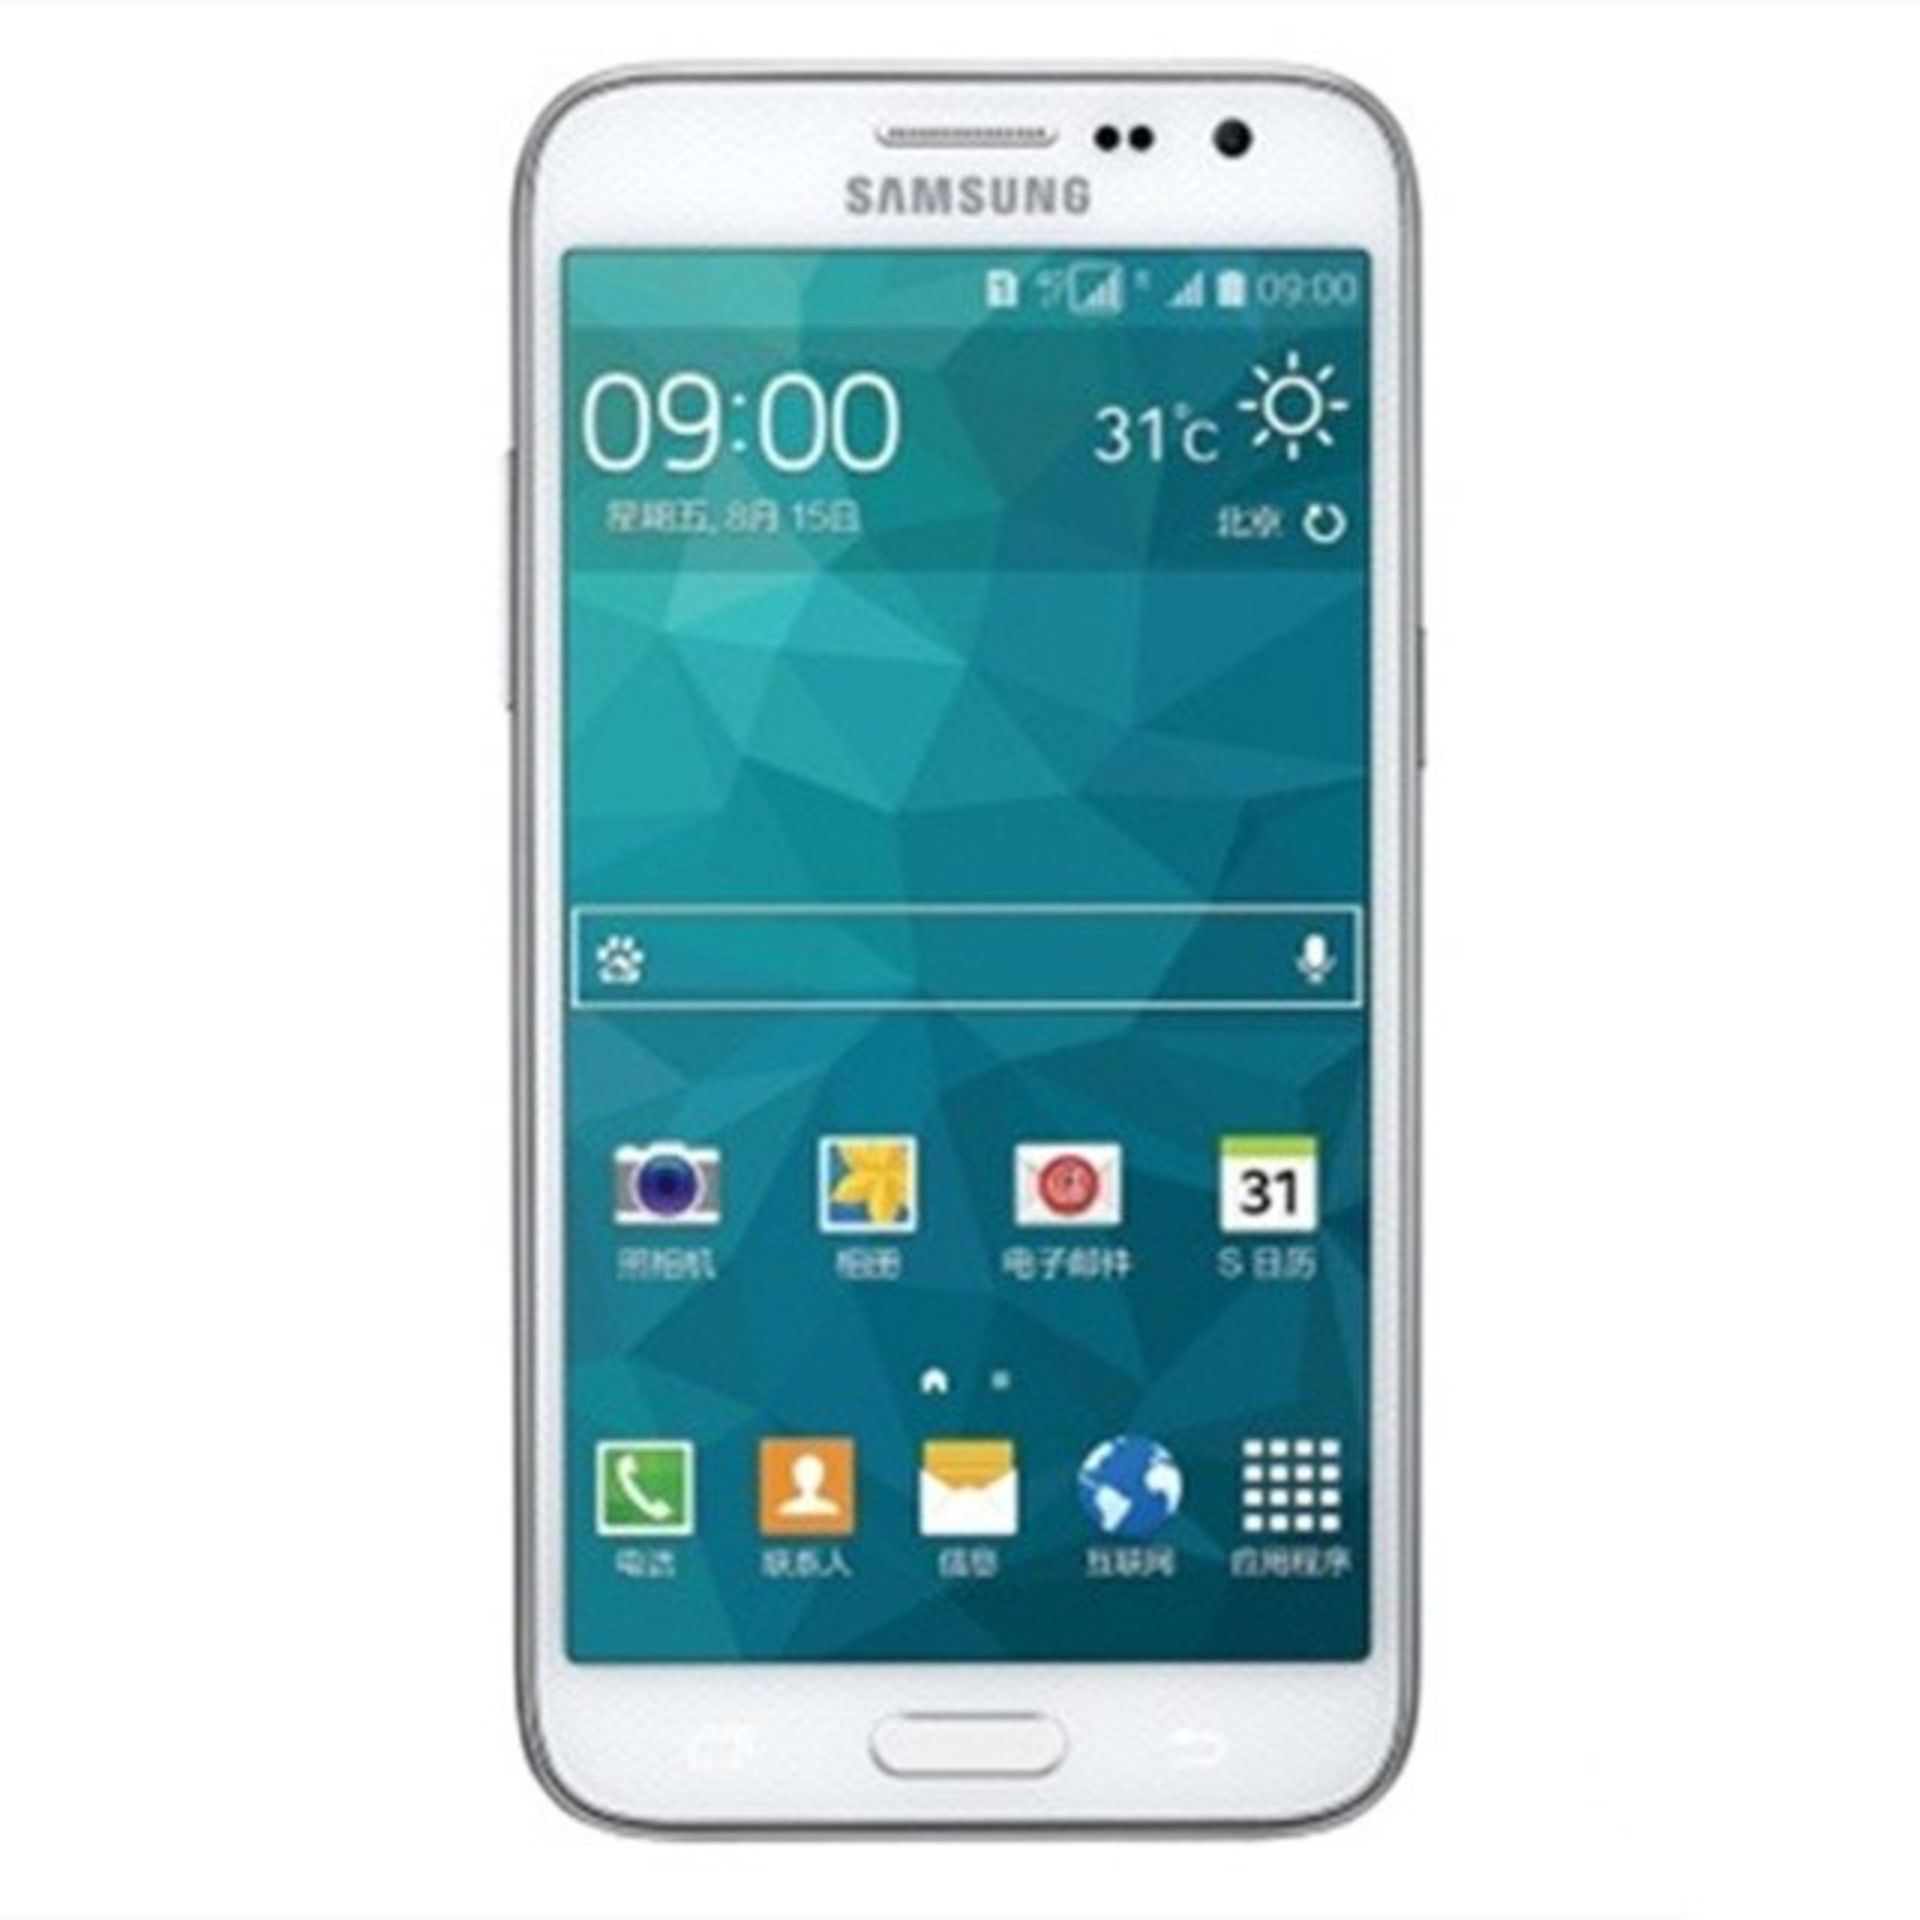 Grade A Samsung G5108Q Colours May Vary Item available approx 12 working days after sale - Image 2 of 2